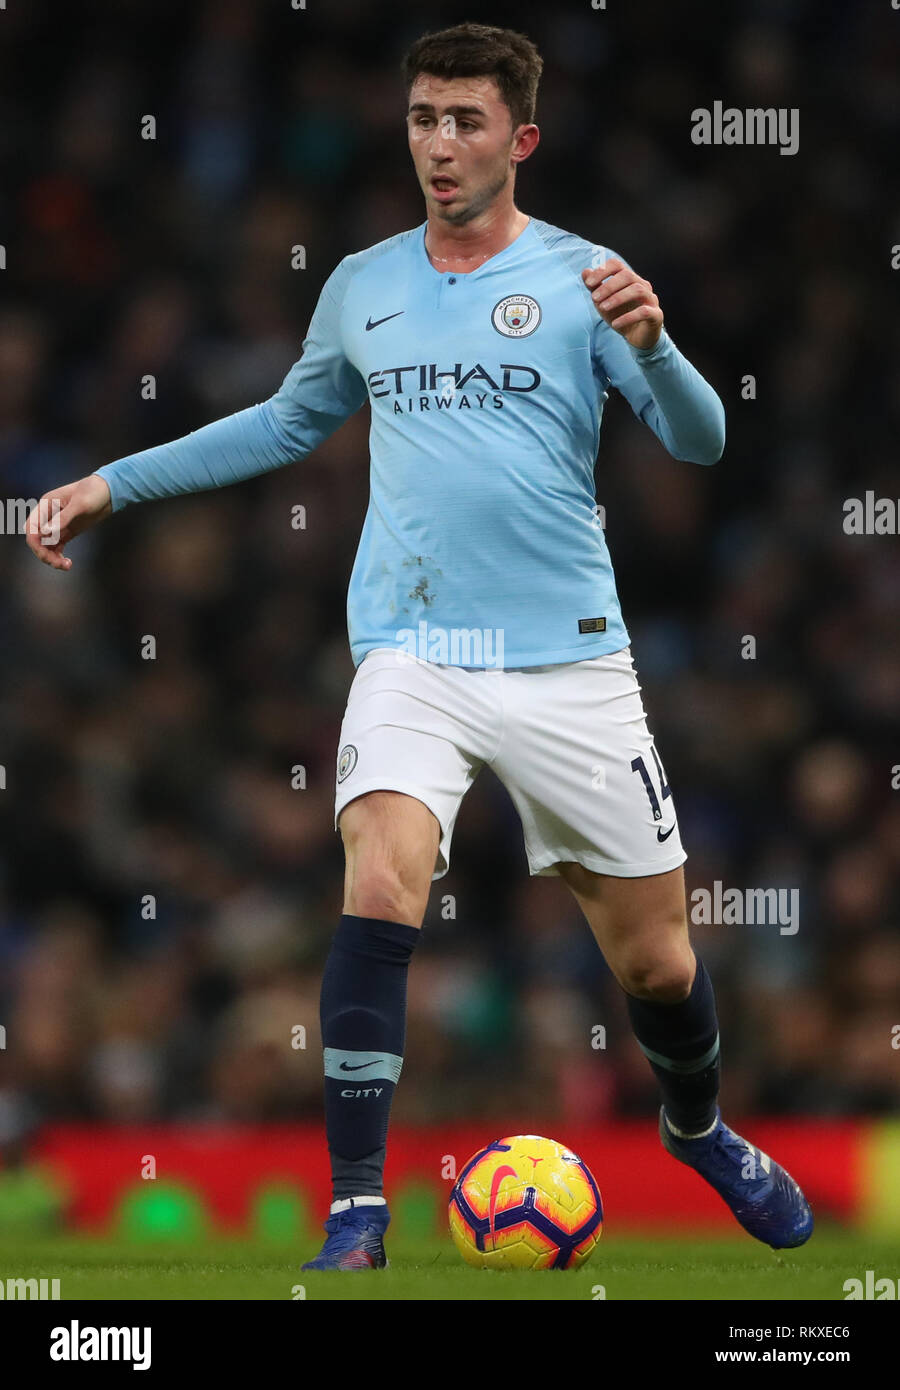 Manchester City's Aymeric Laporte during the Premier League match at the Etihad Stadium, Manchester. Stock Photo